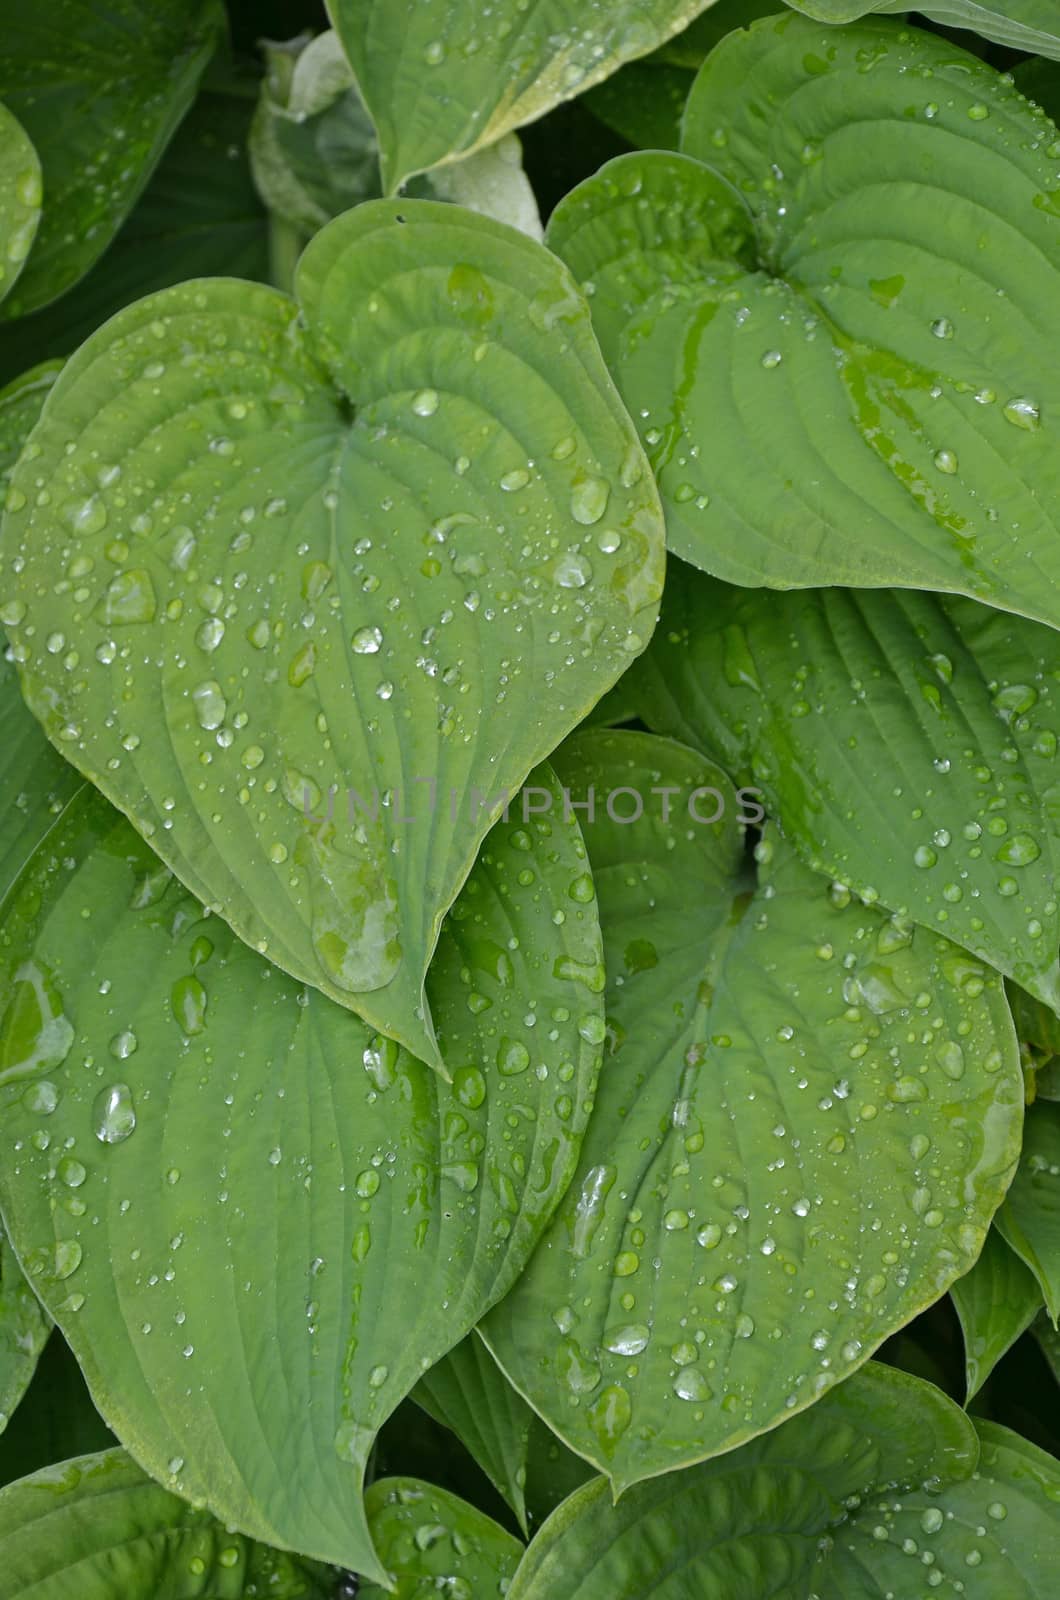 Hosta plant leaves covered in waterdrops